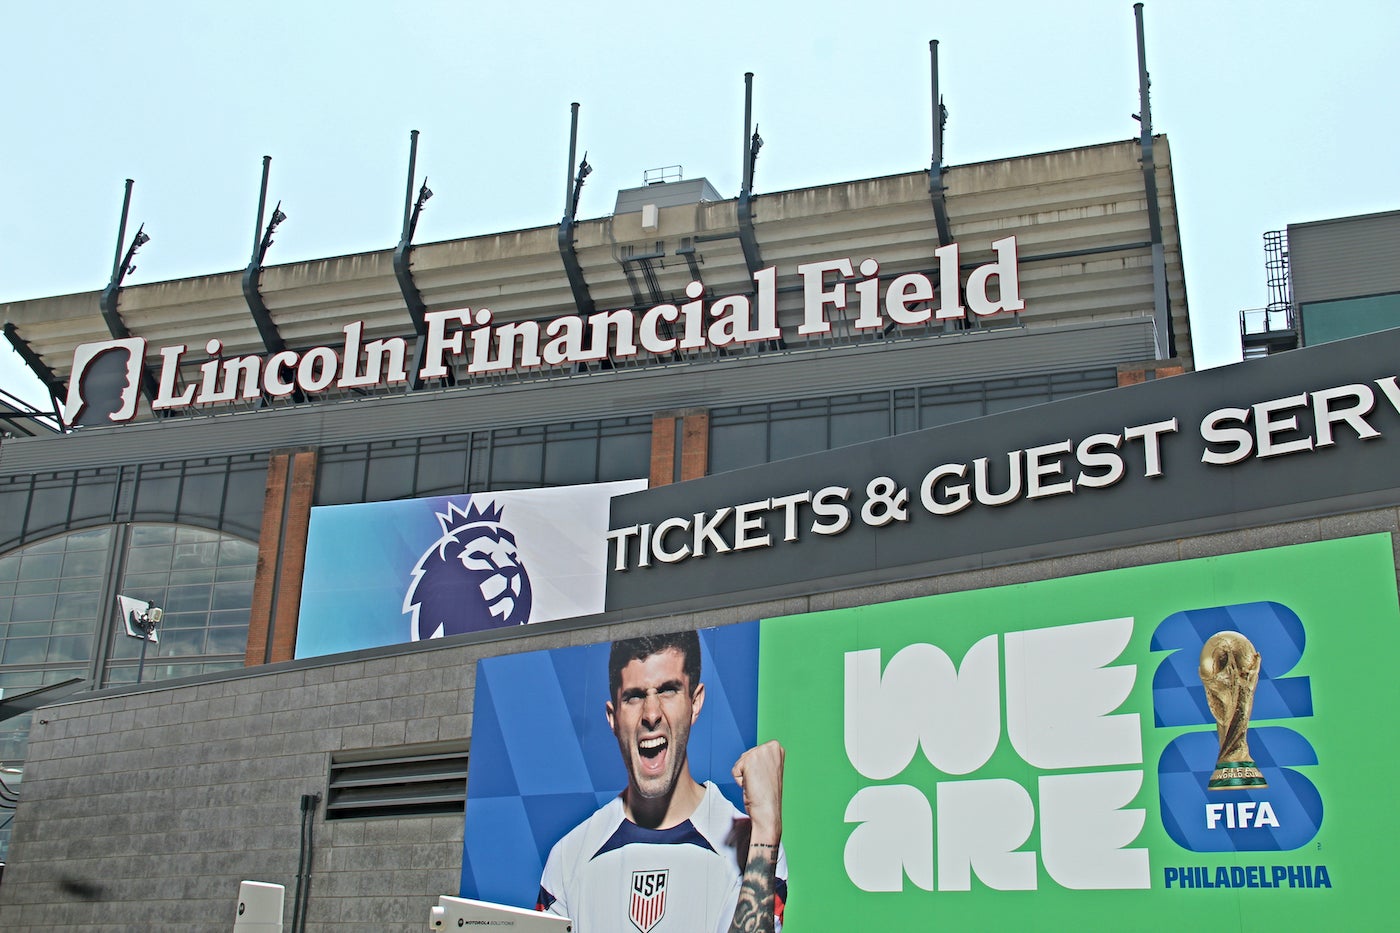 Stadium Security Policy - Lincoln Financial Field